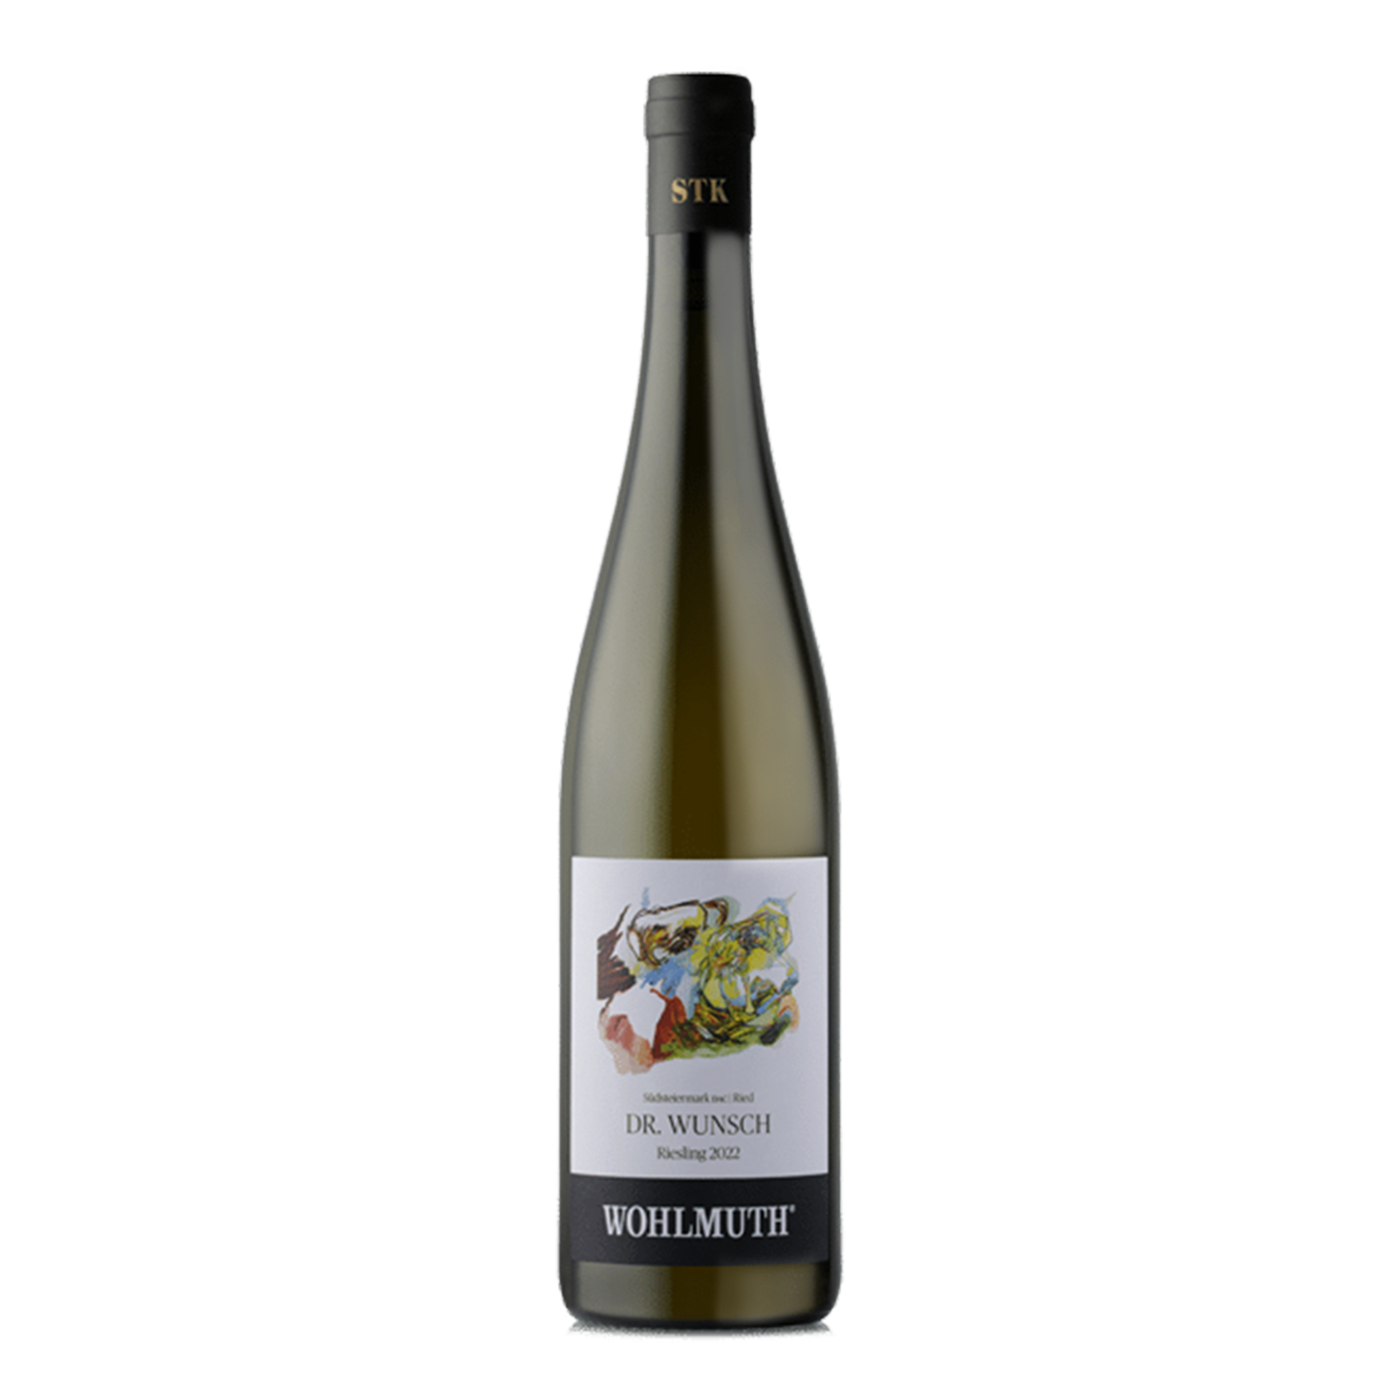 Weingut Wohlmuth - Riesling Ried Dr. Wunsch